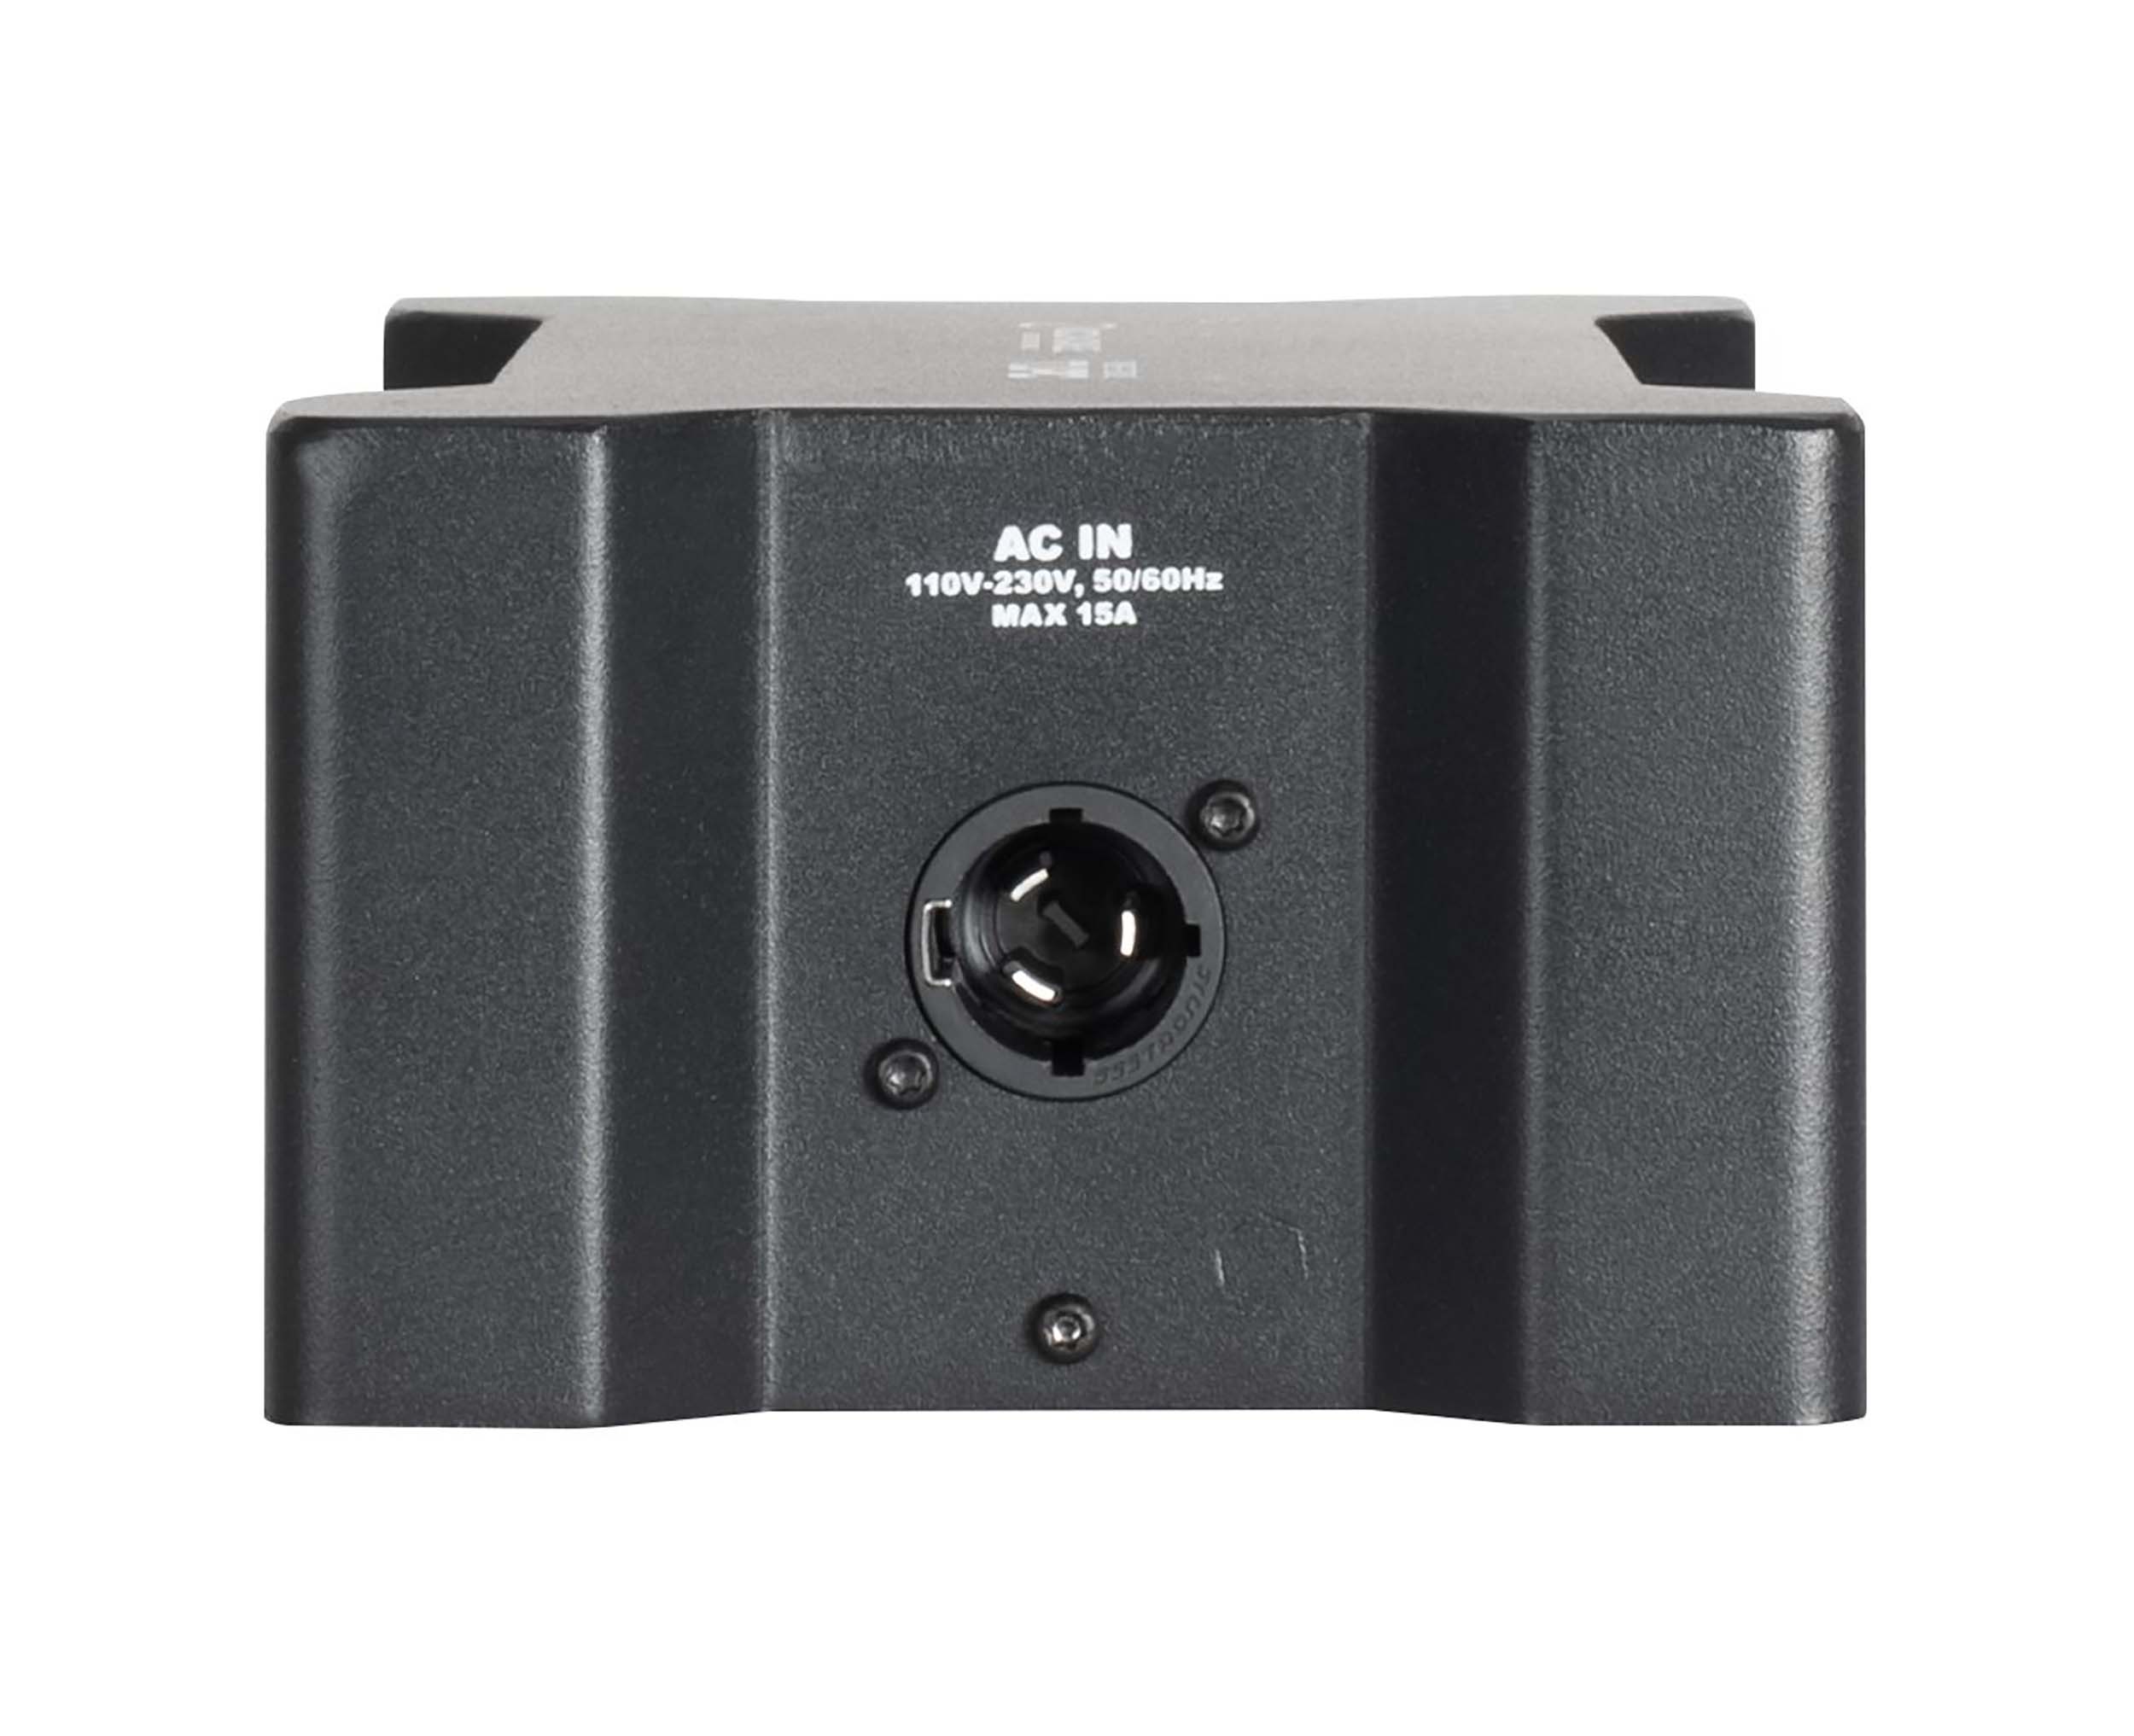 Accu-Cable Power Bone T1PC, Power Distribution Box by Accu Cable